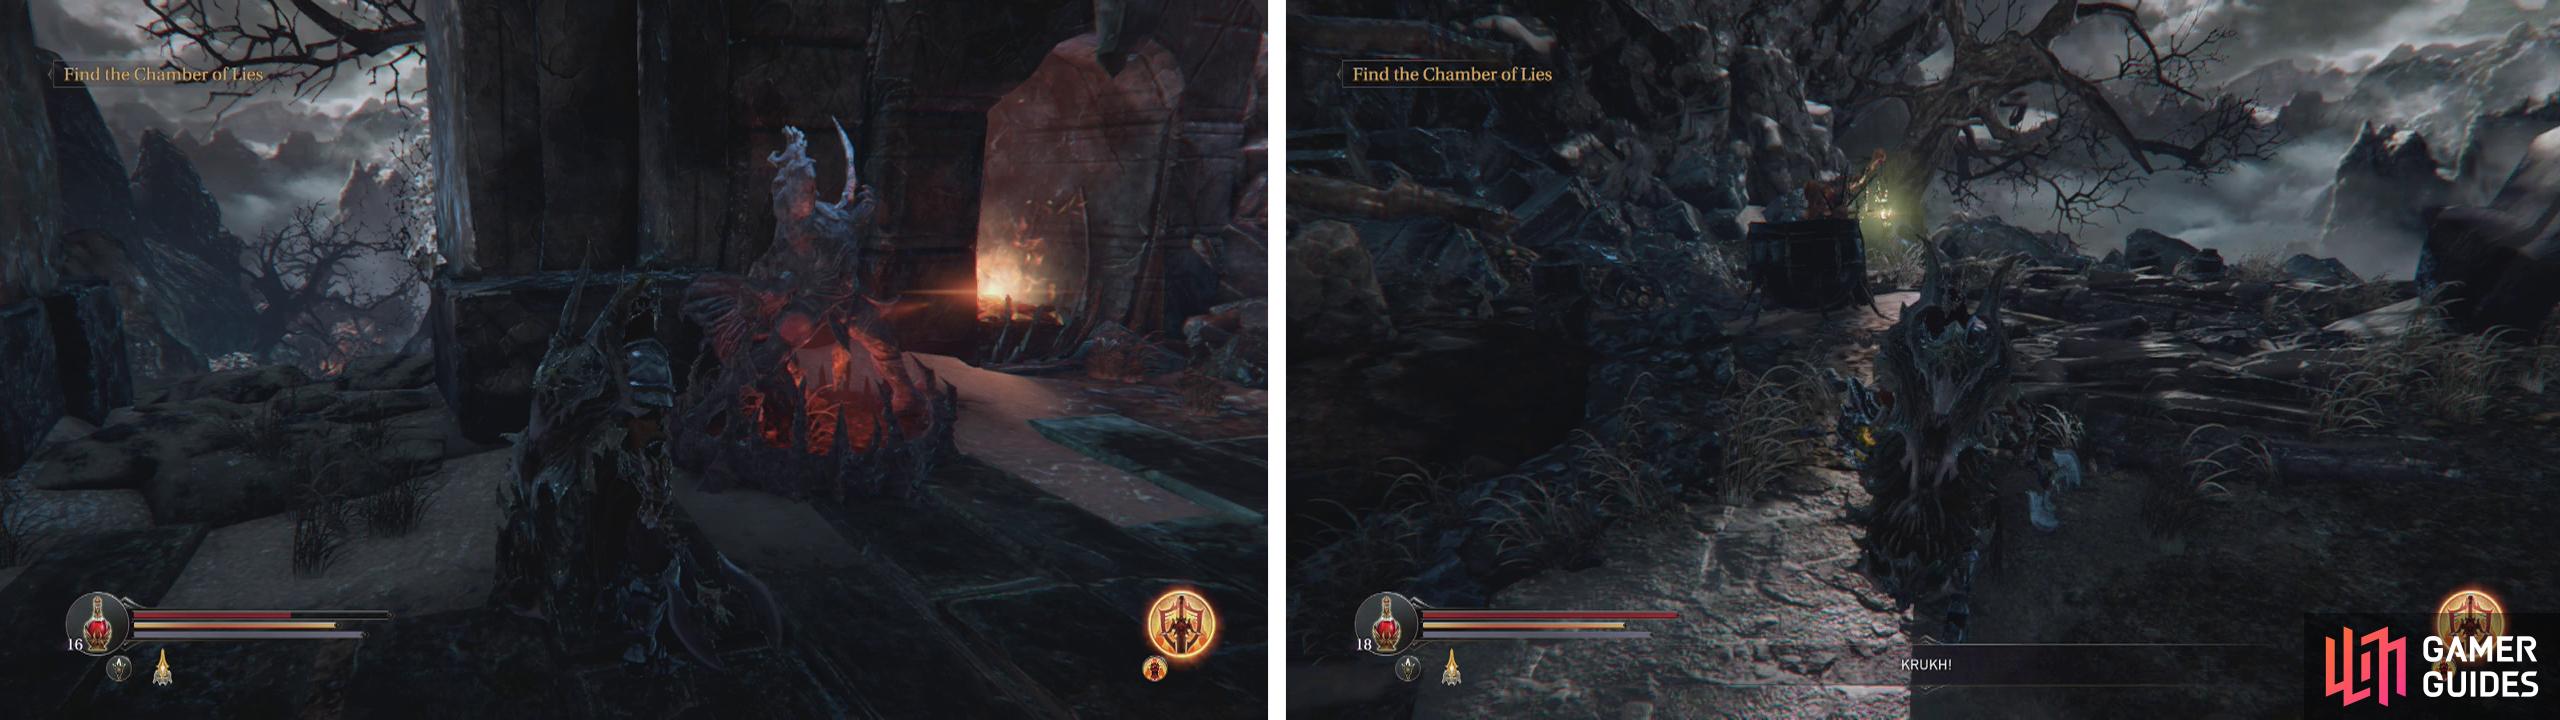 Continue down the snowy path to the Abandoned Range (left). You'll find the Crippled Rhogar by the entrance to the temple (right).